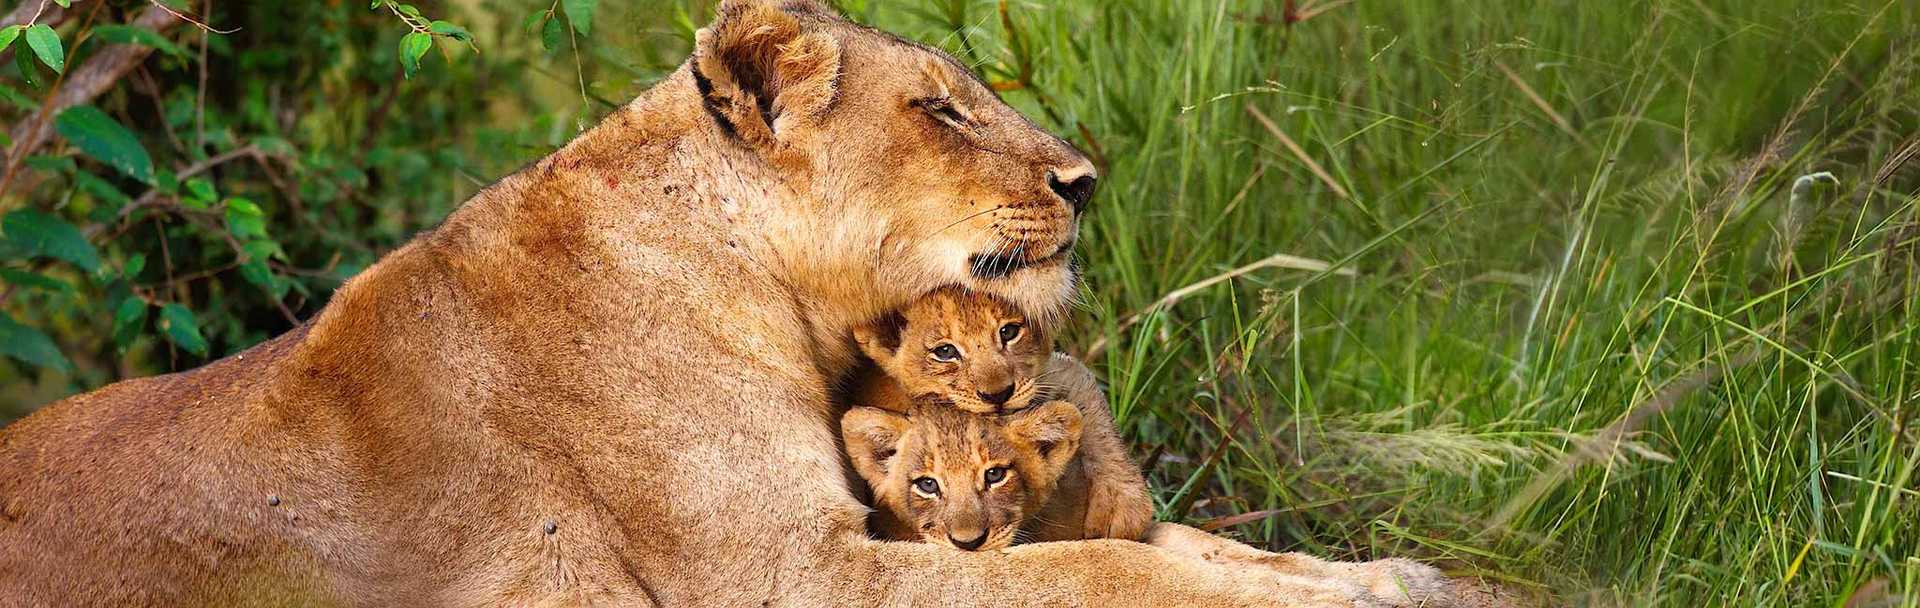 Lioness and her cubs viewed on an African Safari